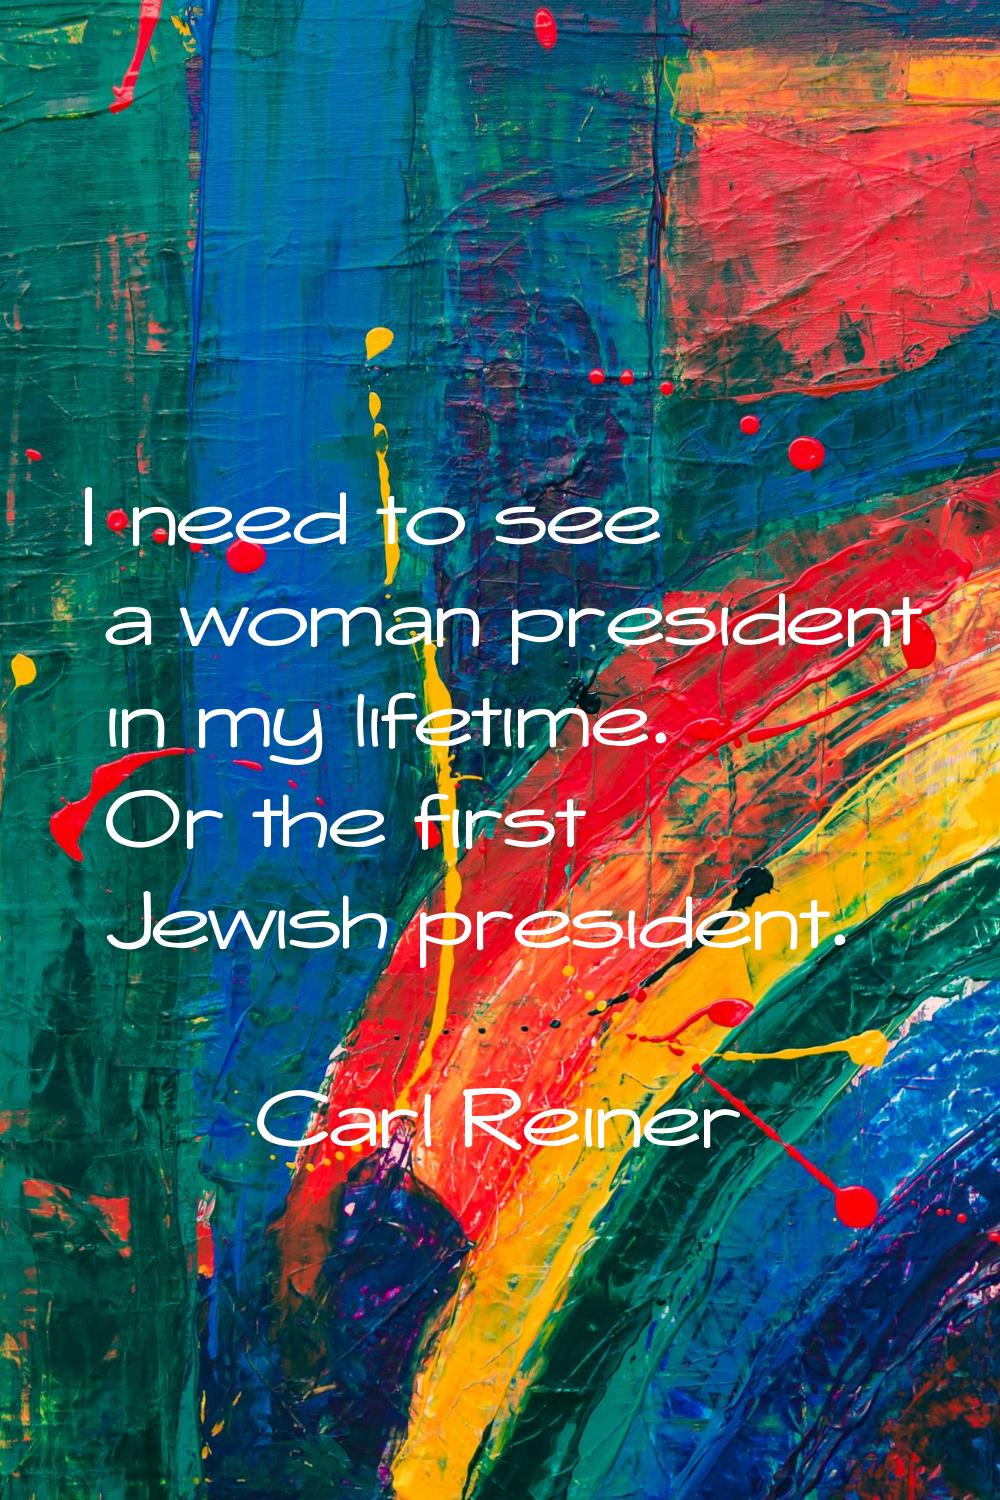 I need to see a woman president in my lifetime. Or the first Jewish president.